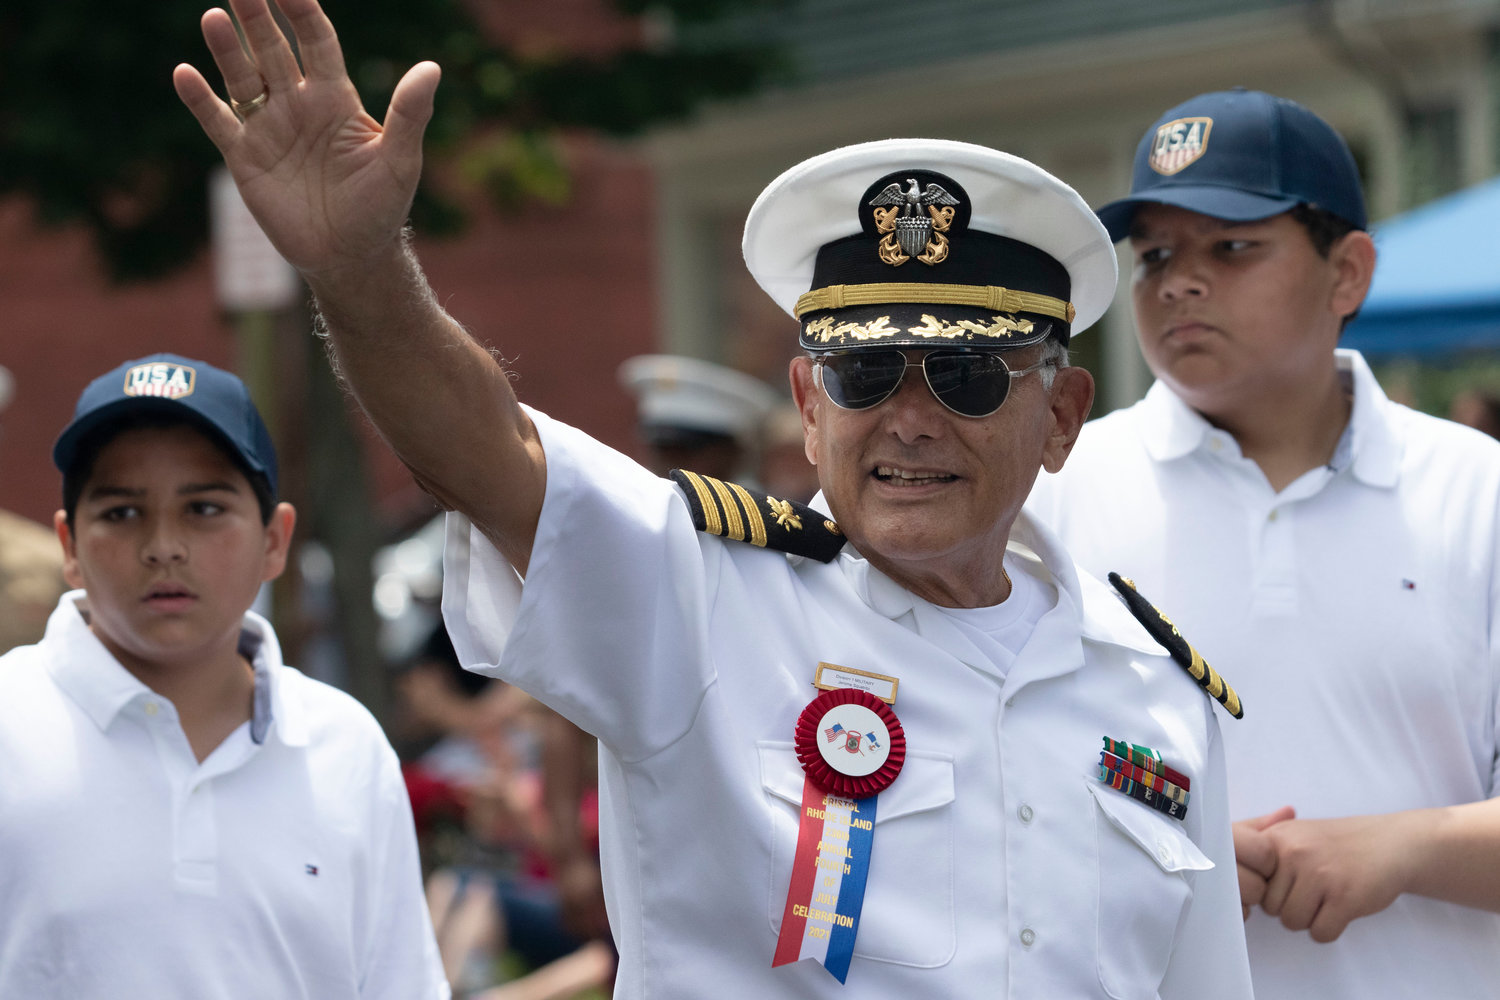 Retired Naval officer and Fourth of July Committee member Jerome Squatrito leads a unit down the route.